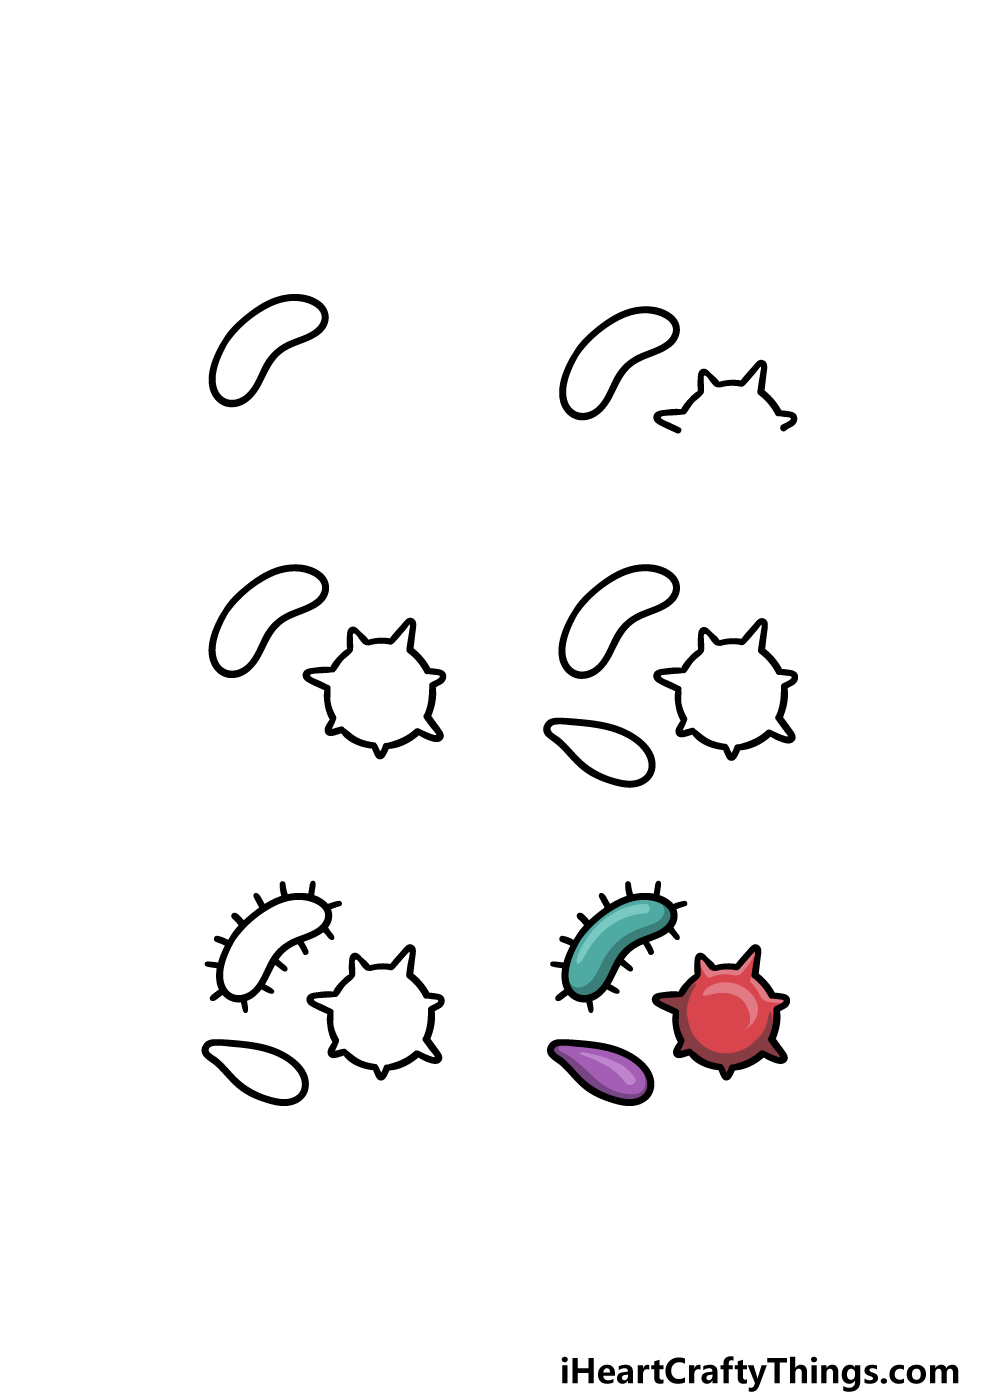 How to Draw Bacteria in 6 steps